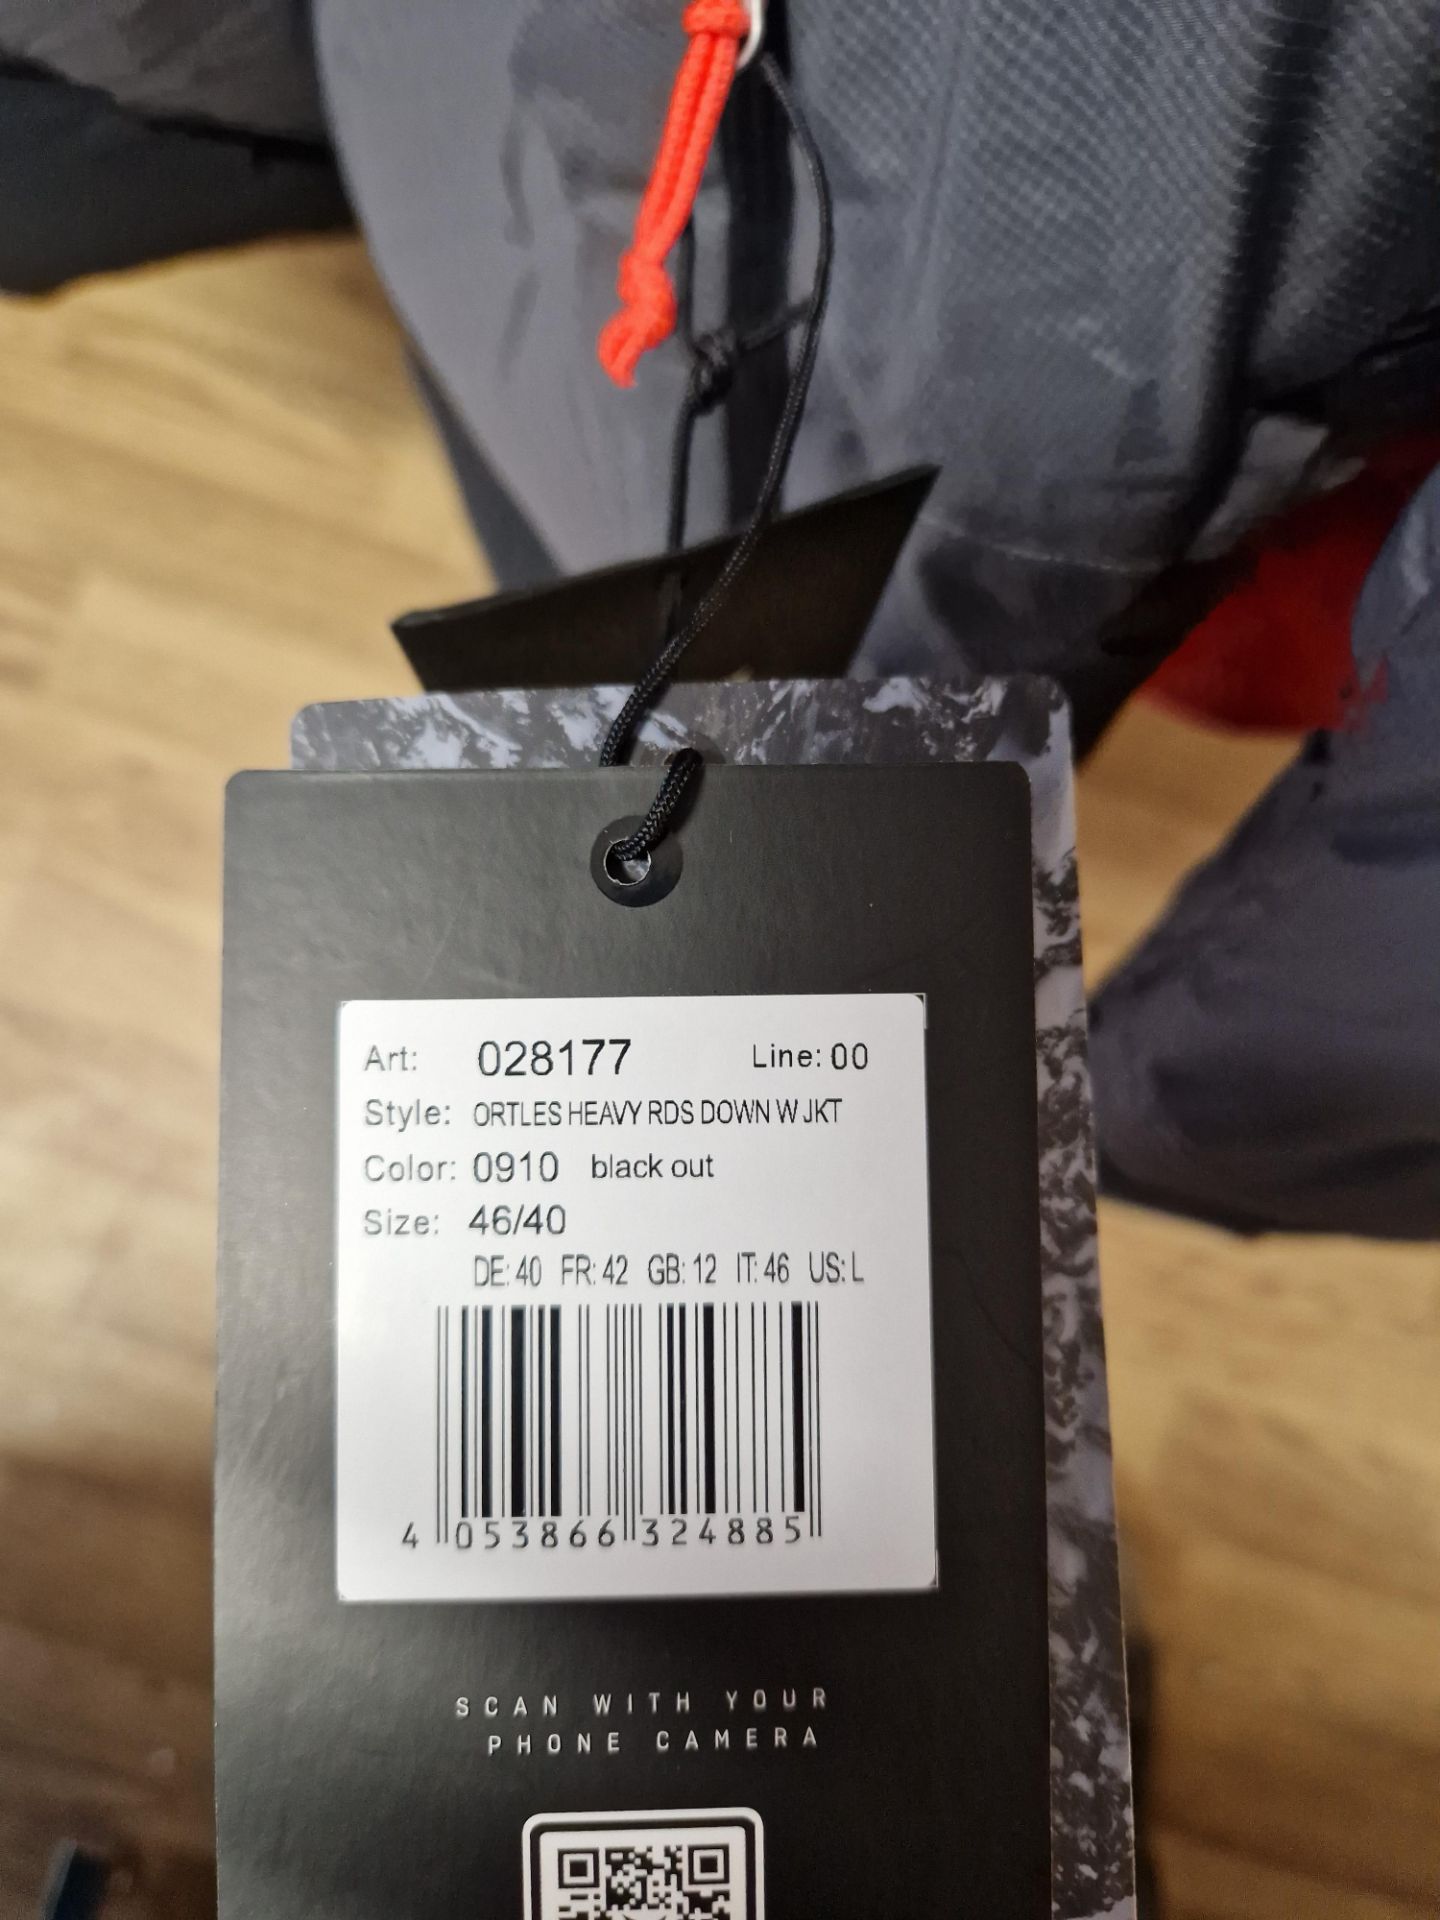 Salewa Ortles Heavy RDS Down W Jacket, Colour: Black Out, Size: 46/40 Please read the following - Image 2 of 2